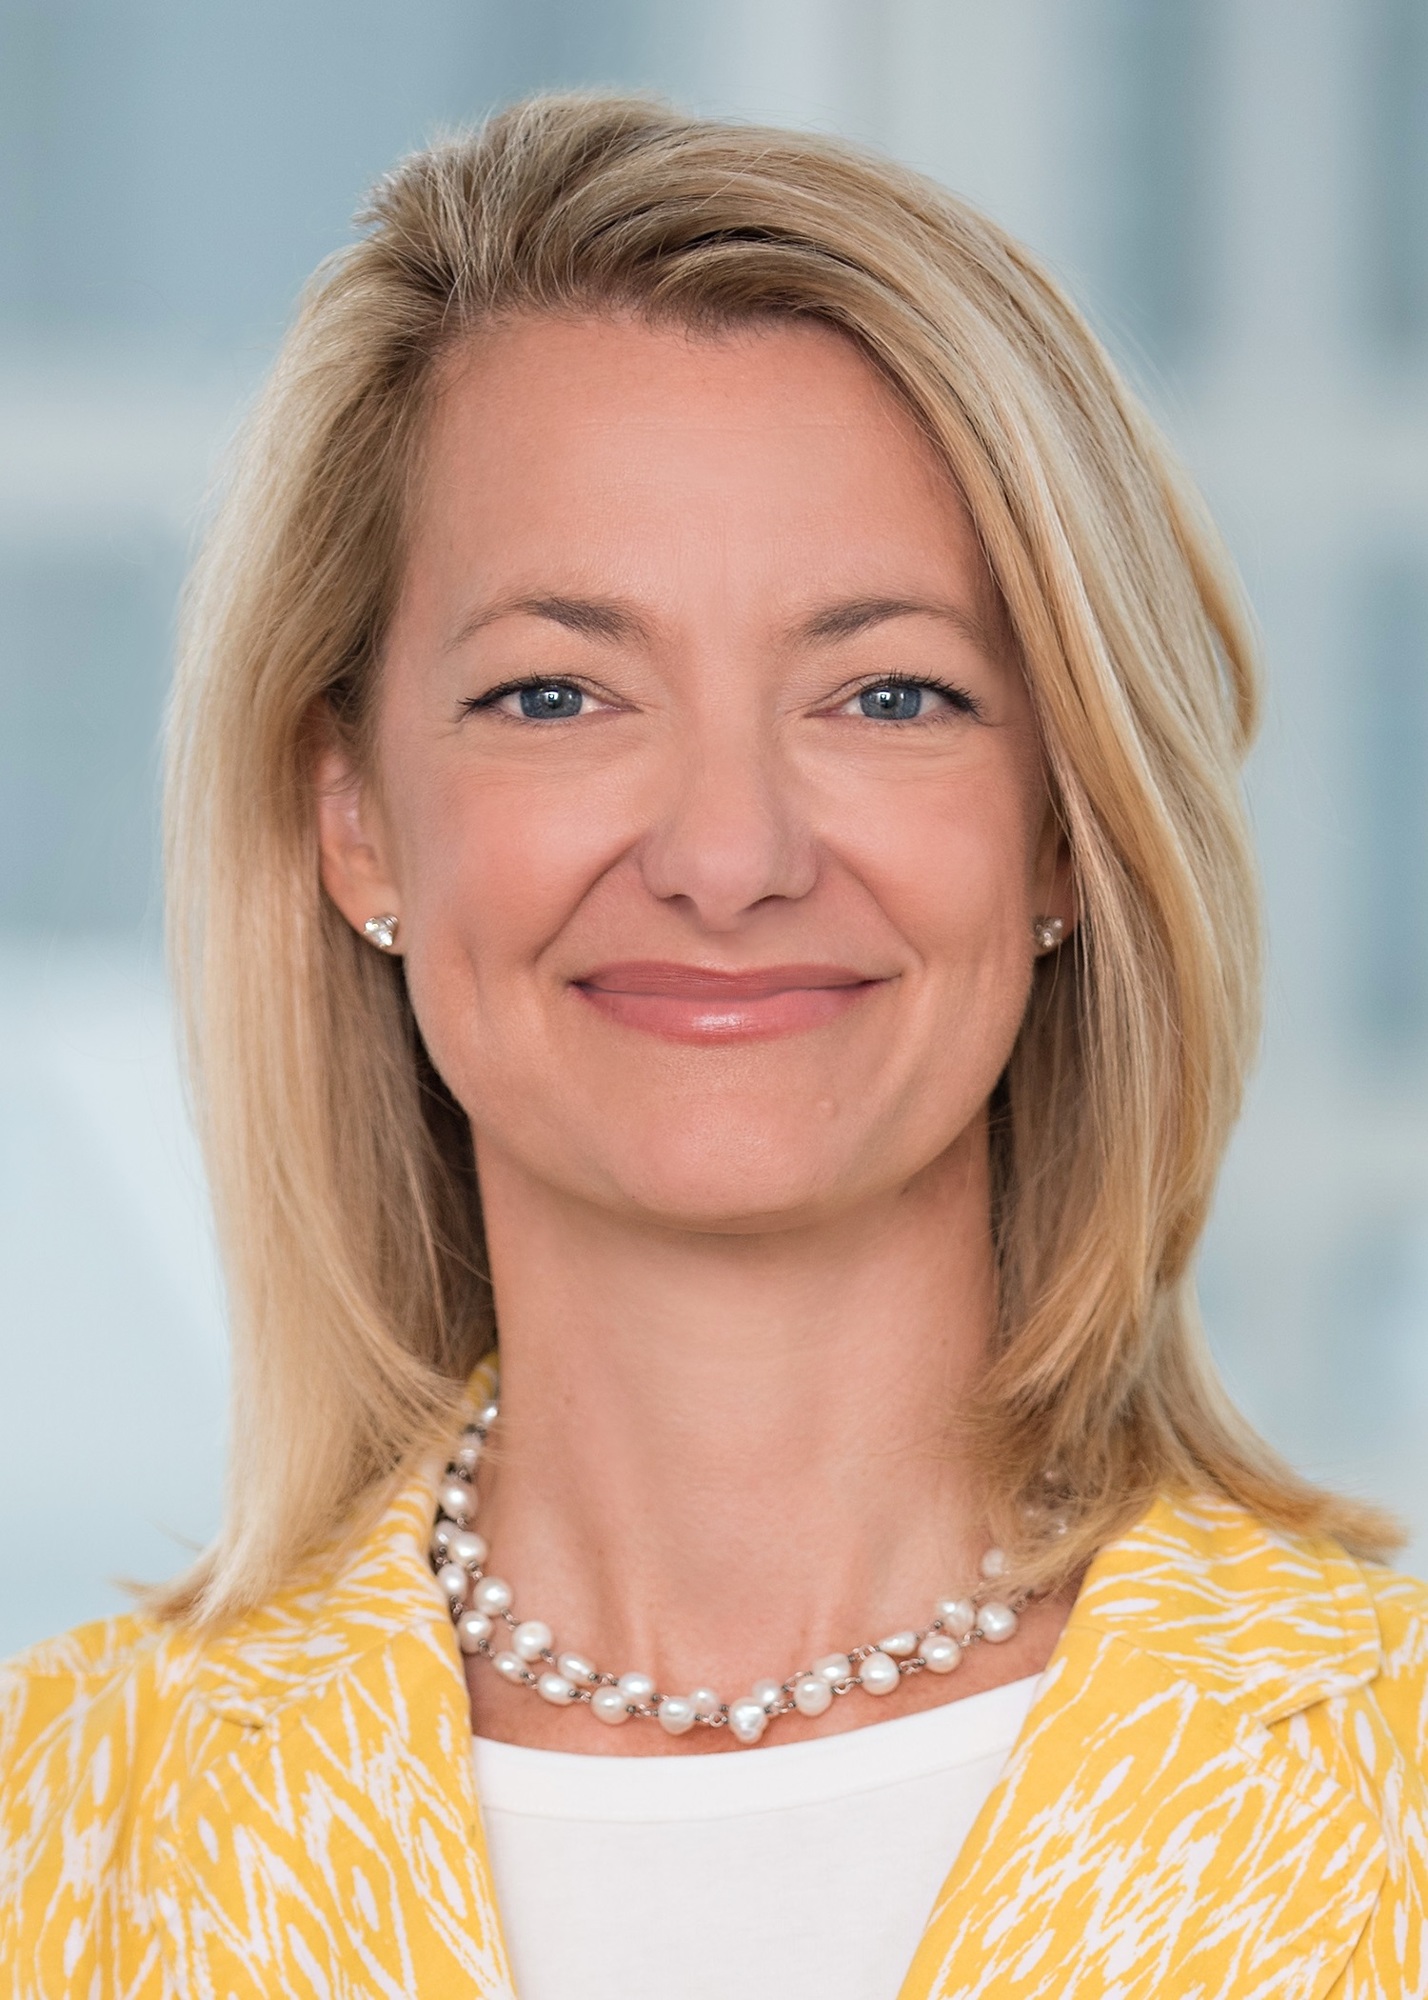 Anne Oxrider, senior vice president and head of wellness programs at Bank of America’s headquarters in Charlotte, North Carolina.